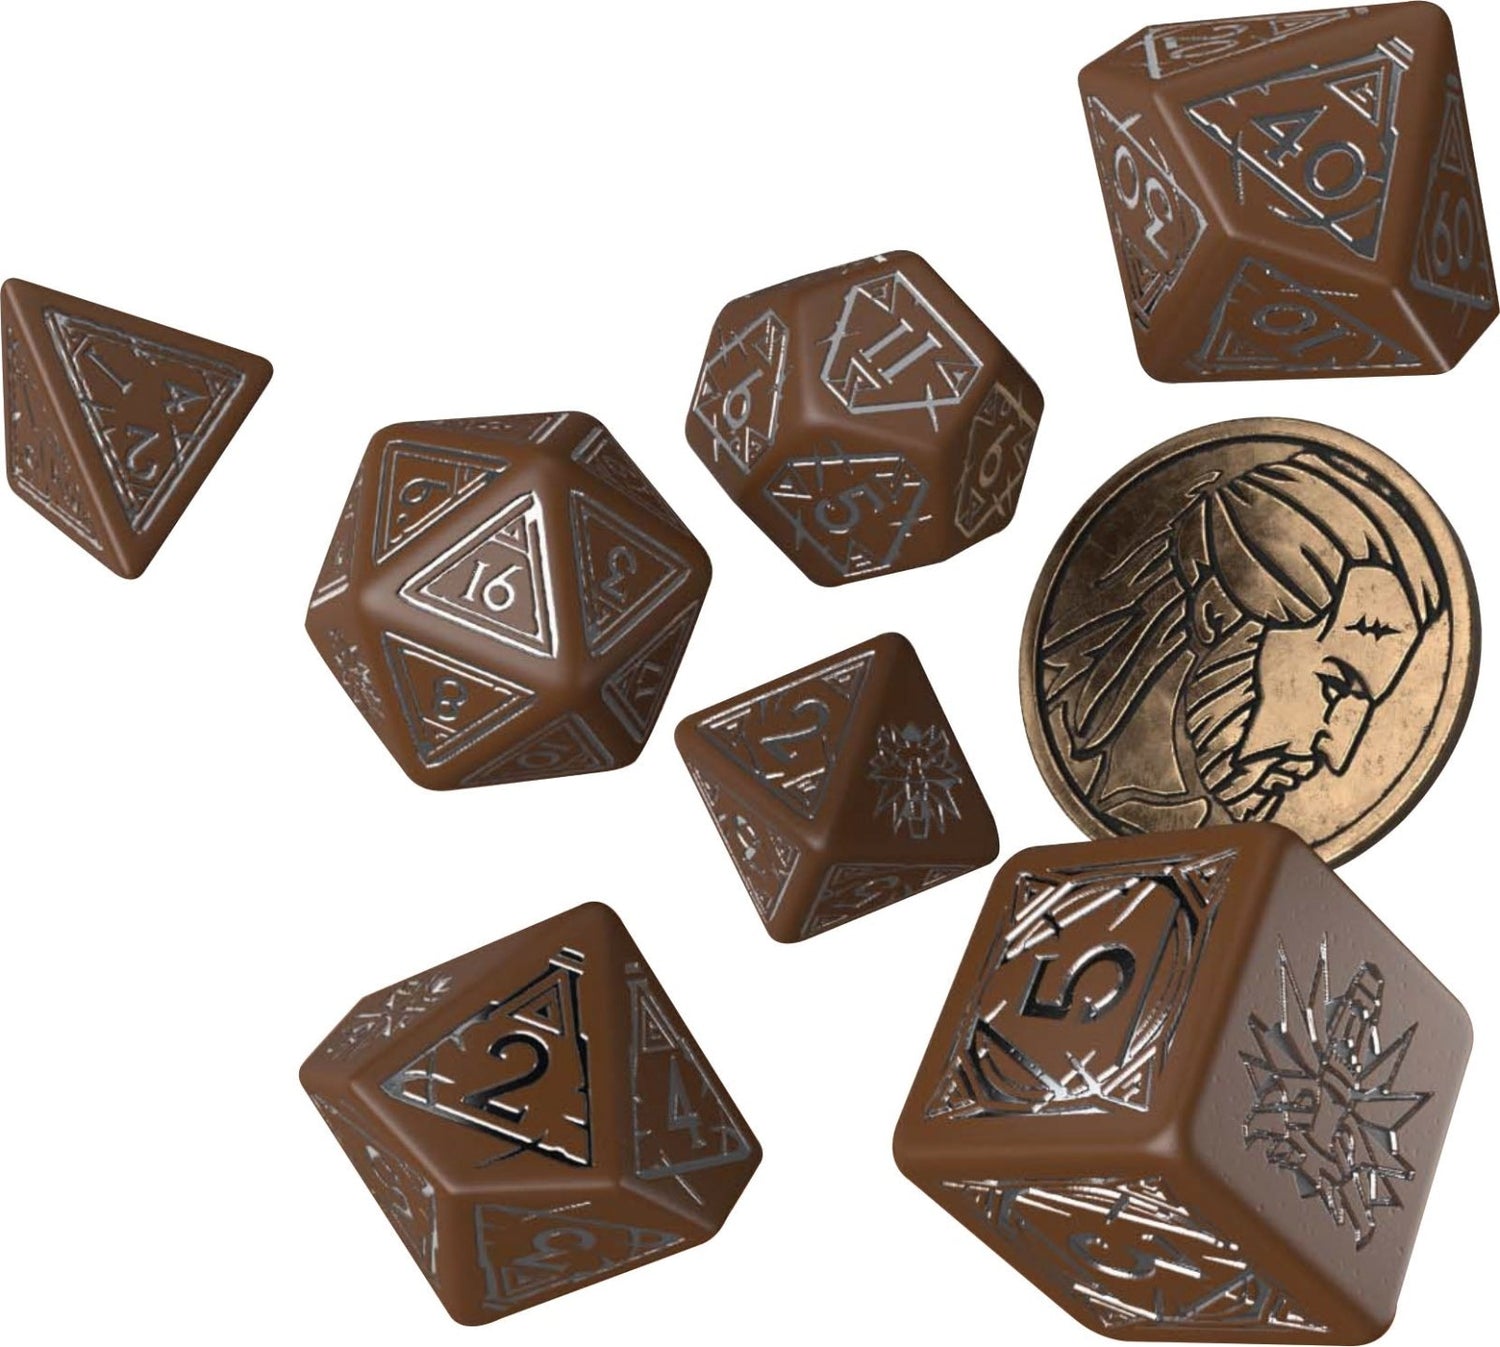 The Witcher Dice Set: Geralt - Roachs Companion (7 dice + coin) - The Fourth Place